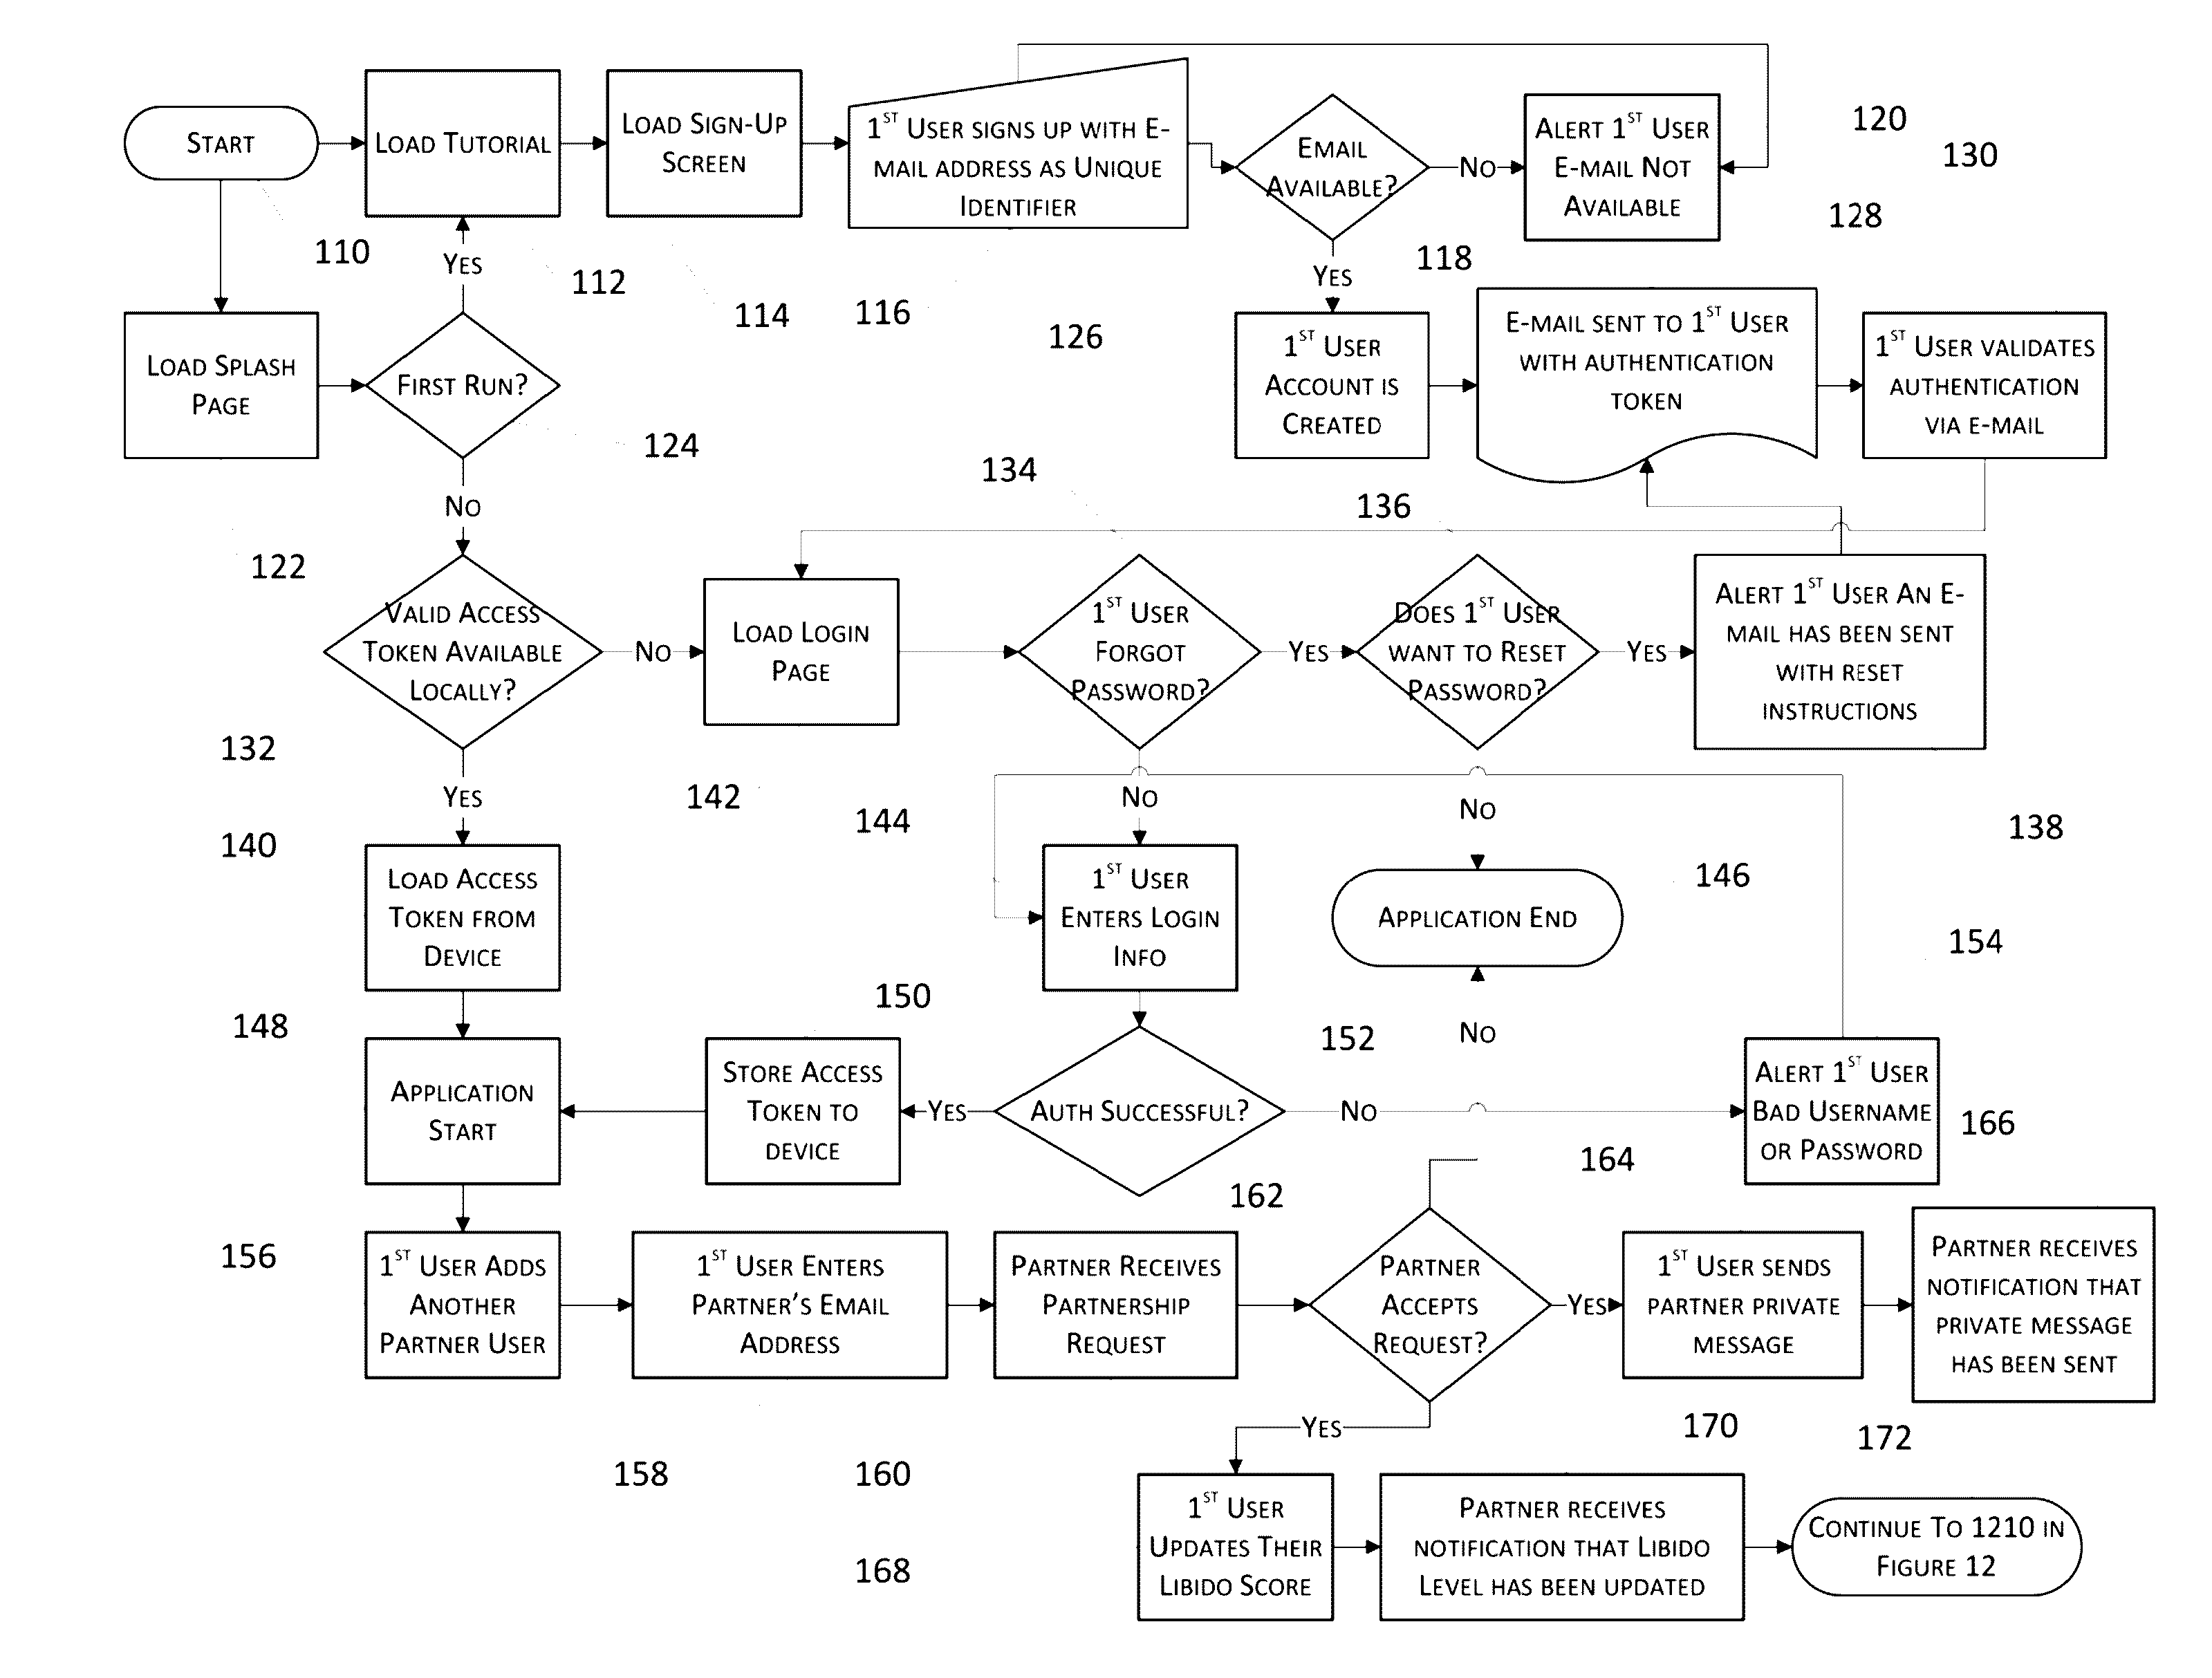 System and Method for Human Sexual Relationship Enhancement